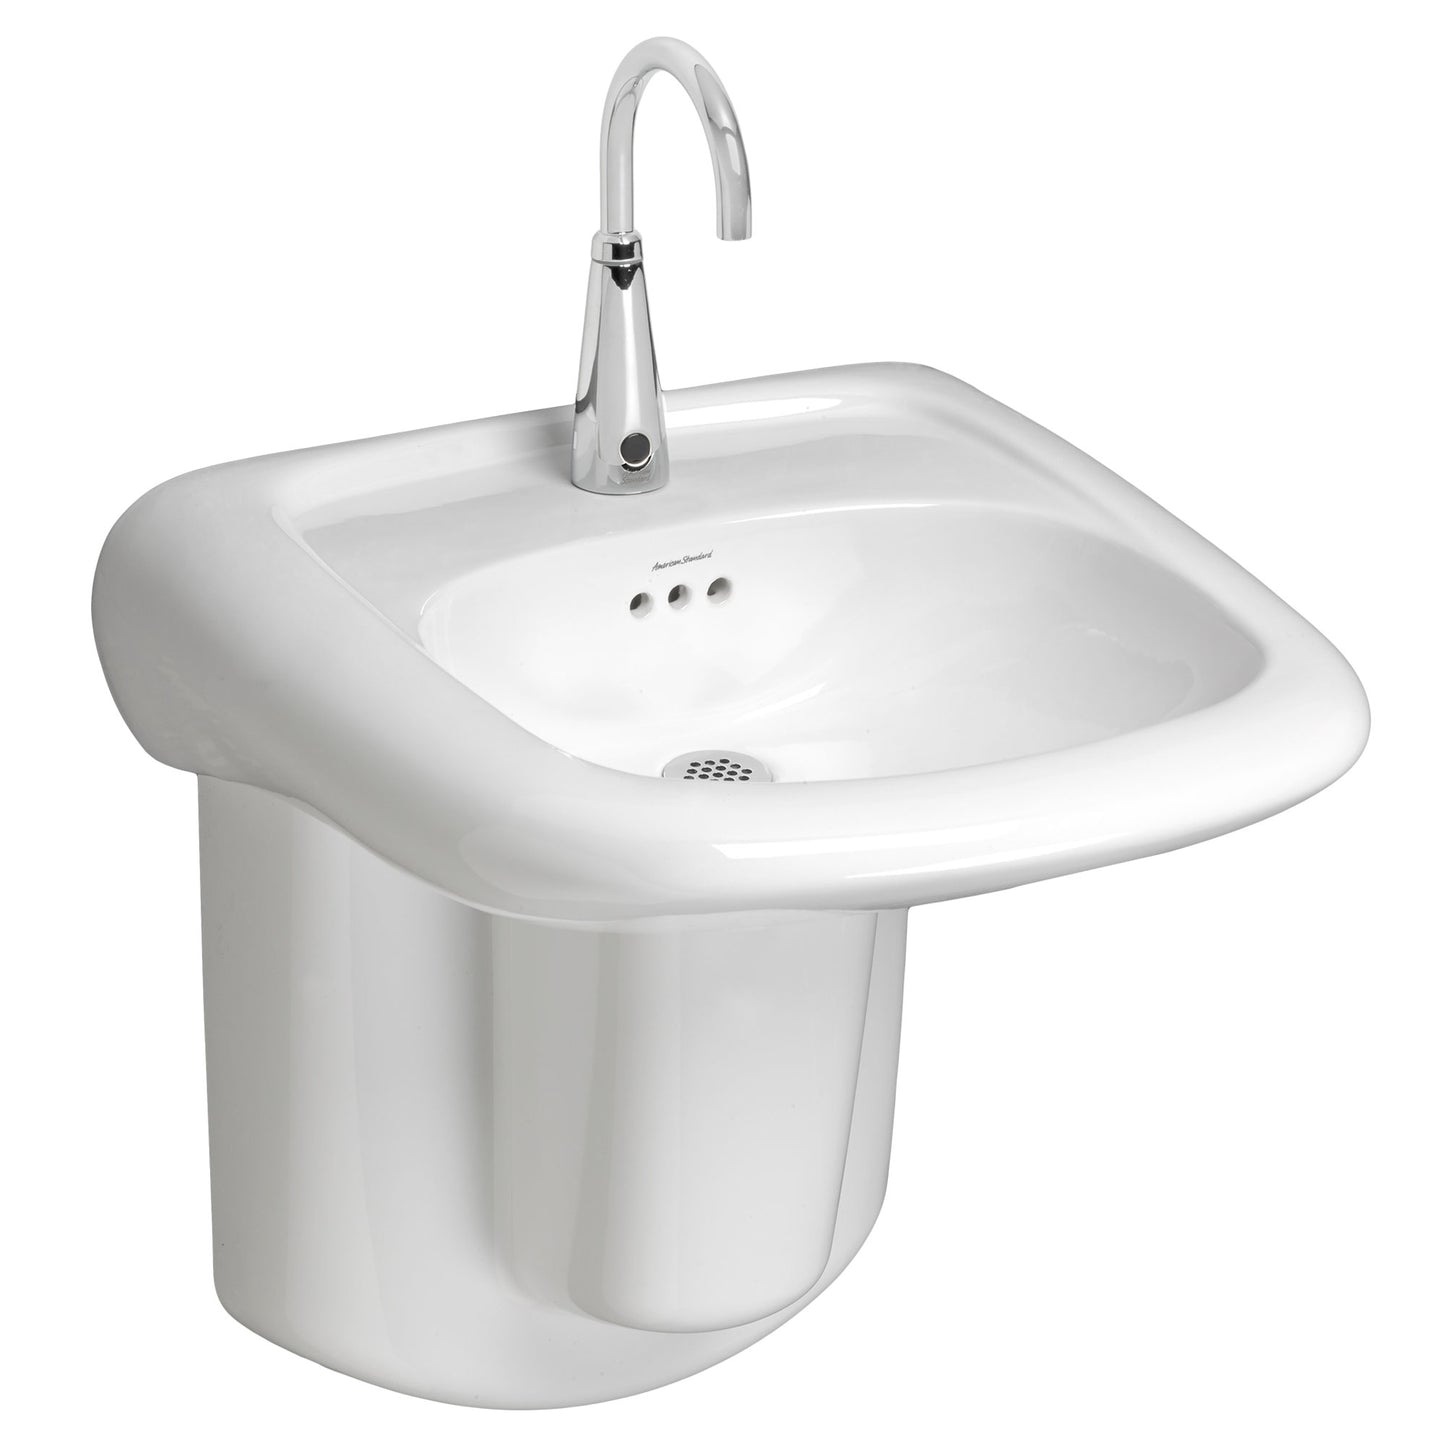 AMERICAN-STANDARD 0955001EC.020, Murro Wall-Hung EverClean Sink With Center Hole Only in White